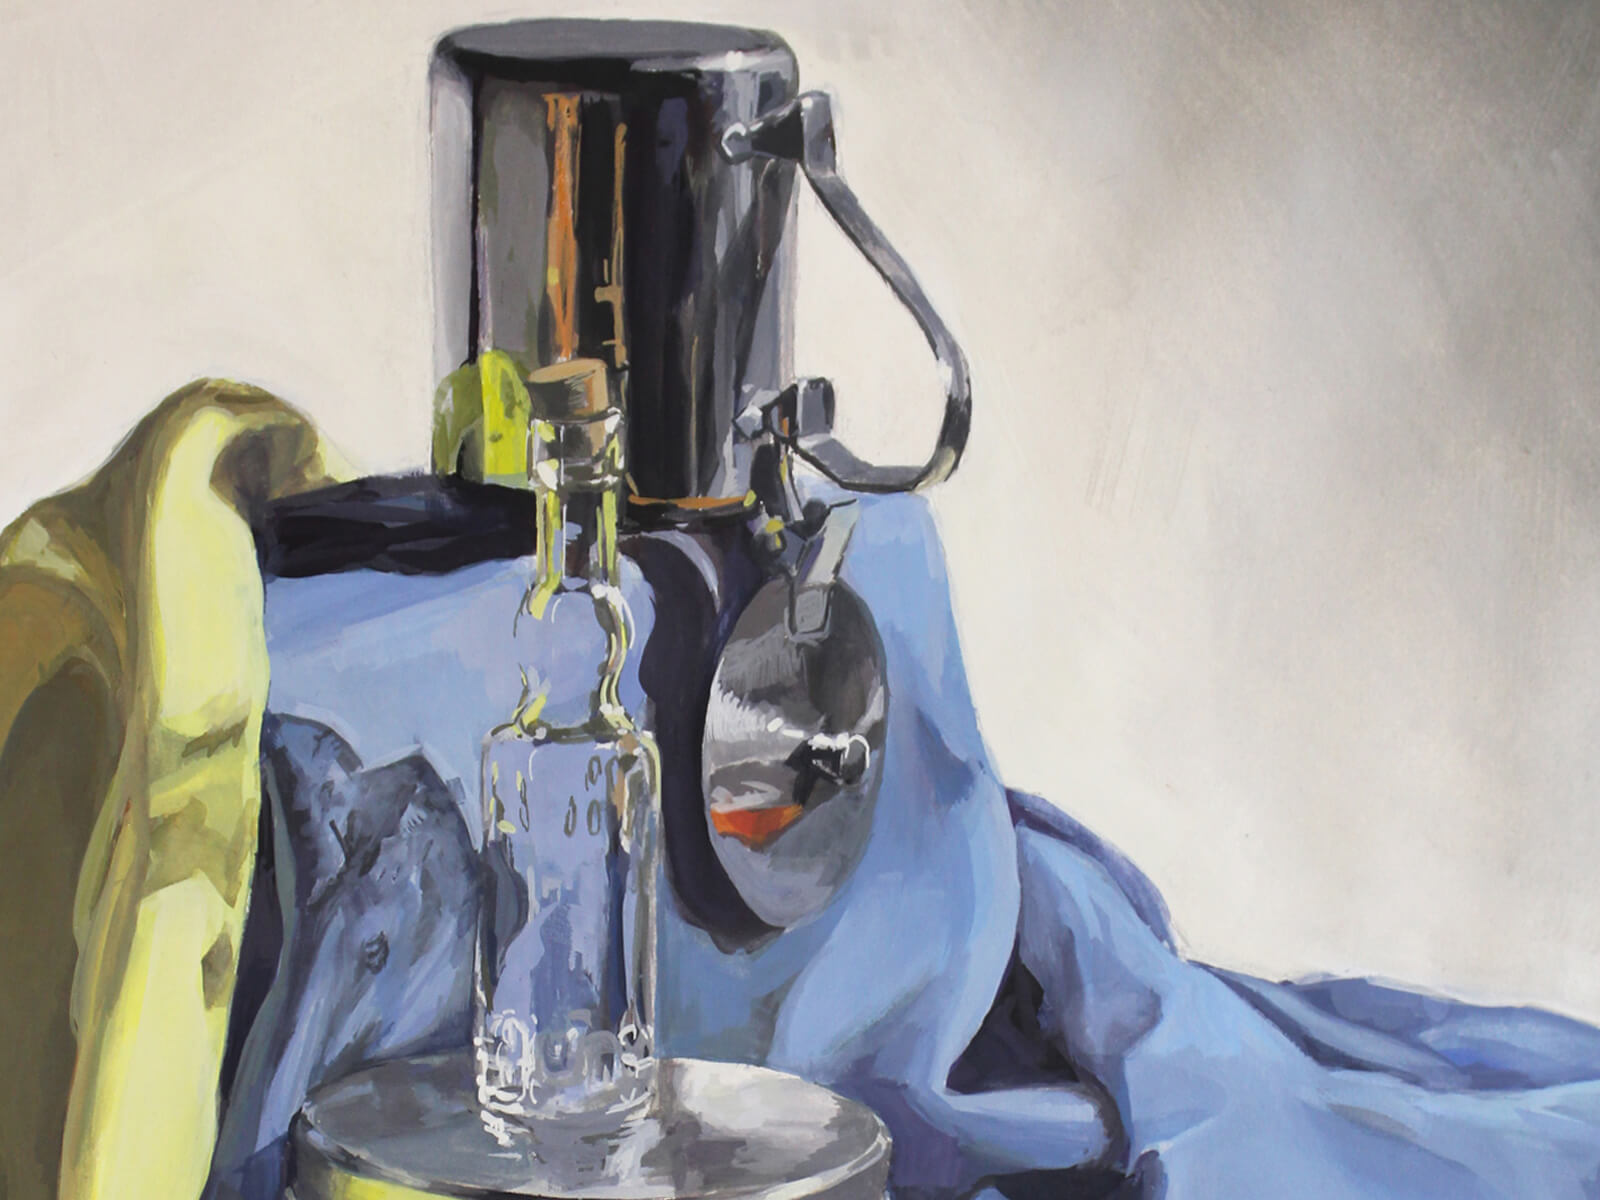 still-life traditional painting of a corked bottle, a tea cup, and aluminum pots on a blue draped sheet